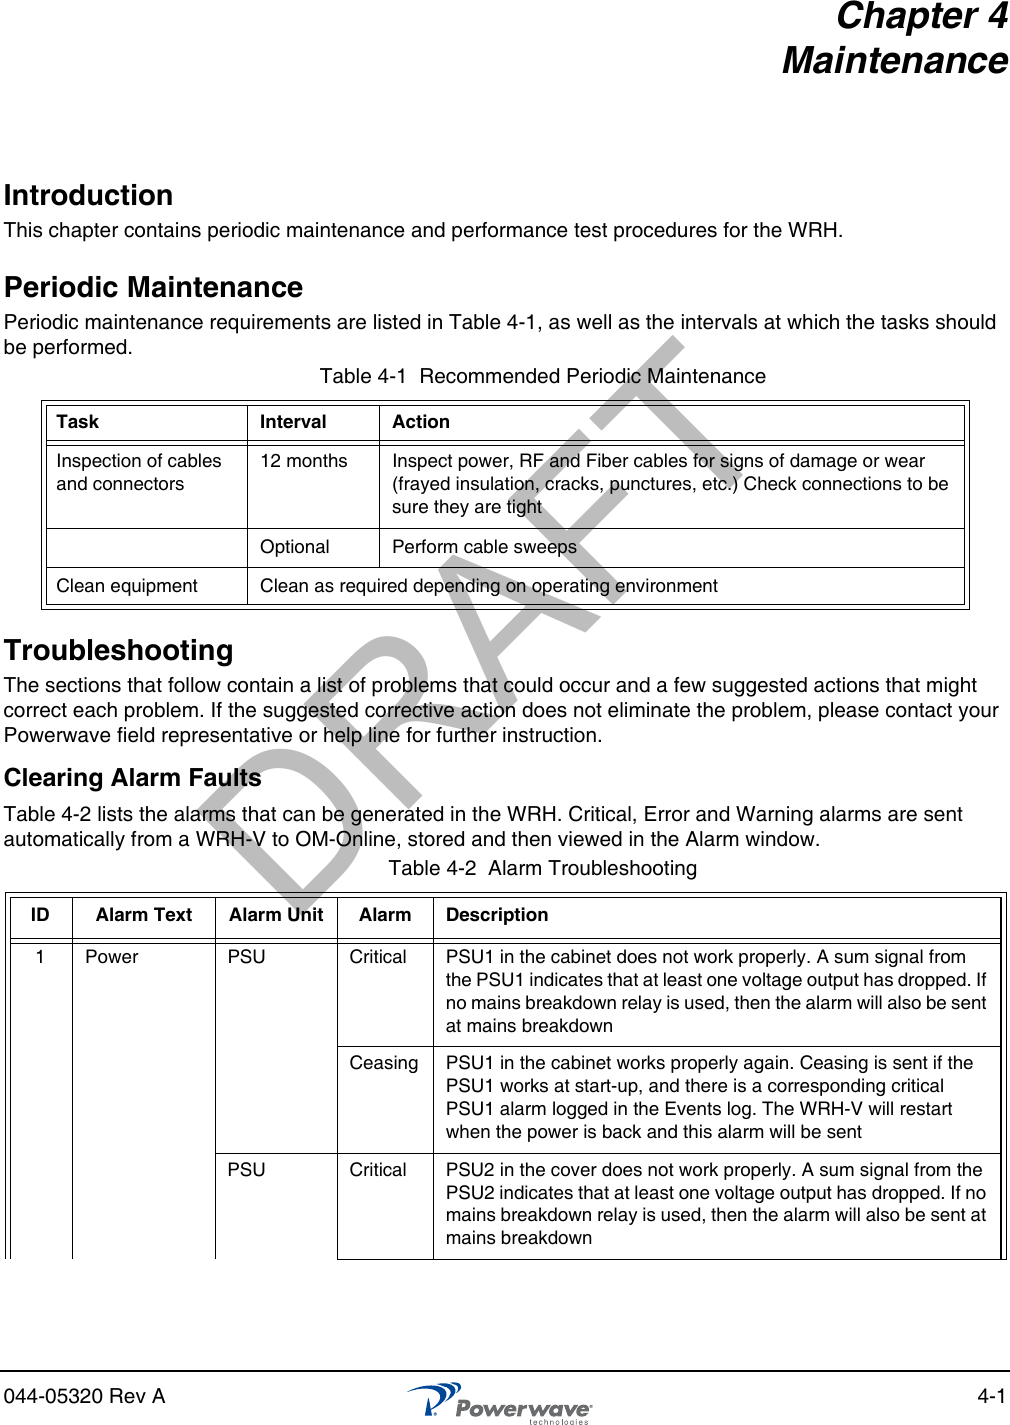 044-05320 Rev A 4-1Chapter 4MaintenanceIntroductionThis chapter contains periodic maintenance and performance test procedures for the WRH.Periodic MaintenancePeriodic maintenance requirements are listed in Table 4-1, as well as the intervals at which the tasks should be performed.TroubleshootingThe sections that follow contain a list of problems that could occur and a few suggested actions that might correct each problem. If the suggested corrective action does not eliminate the problem, please contact your Powerwave field representative or help line for further instruction.Clearing Alarm FaultsTable 4-2 lists the alarms that can be generated in the WRH. Critical, Error and Warning alarms are sent automatically from a WRH-V to OM-Online, stored and then viewed in the Alarm window.Table 4-1  Recommended Periodic MaintenanceTask Interval ActionInspection of cables and connectors12 months Inspect power, RF and Fiber cables for signs of damage or wear (frayed insulation, cracks, punctures, etc.) Check connections to be sure they are tightOptional Perform cable sweepsClean equipment Clean as required depending on operating environmentTable 4-2  Alarm TroubleshootingID Alarm Text Alarm Unit Alarm Description1 Power PSU Critical PSU1 in the cabinet does not work properly. A sum signal from the PSU1 indicates that at least one voltage output has dropped. If no mains breakdown relay is used, then the alarm will also be sent at mains breakdownCeasing PSU1 in the cabinet works properly again. Ceasing is sent if the PSU1 works at start-up, and there is a corresponding critical PSU1 alarm logged in the Events log. The WRH-V will restart when the power is back and this alarm will be sentPSU Critical PSU2 in the cover does not work properly. A sum signal from the PSU2 indicates that at least one voltage output has dropped. If no mains breakdown relay is used, then the alarm will also be sent at mains breakdownDRAFT